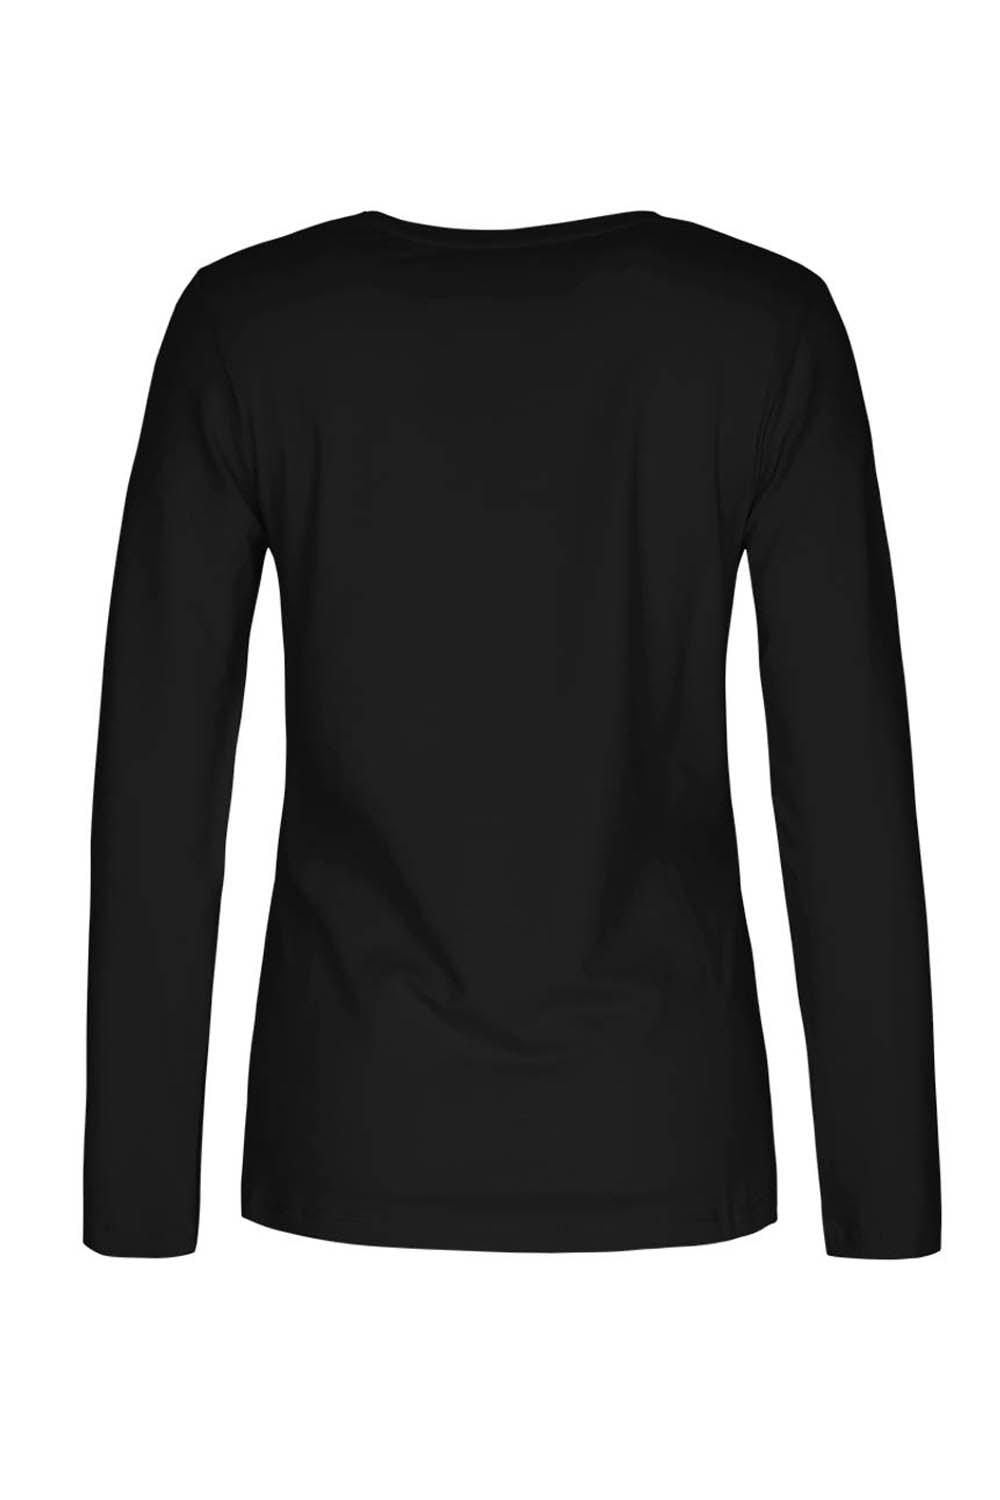 Dolcezza Top - Style 72500 - T-Shirt AW22, Black, New, Pullover, Sale, Top ginasmartboutique